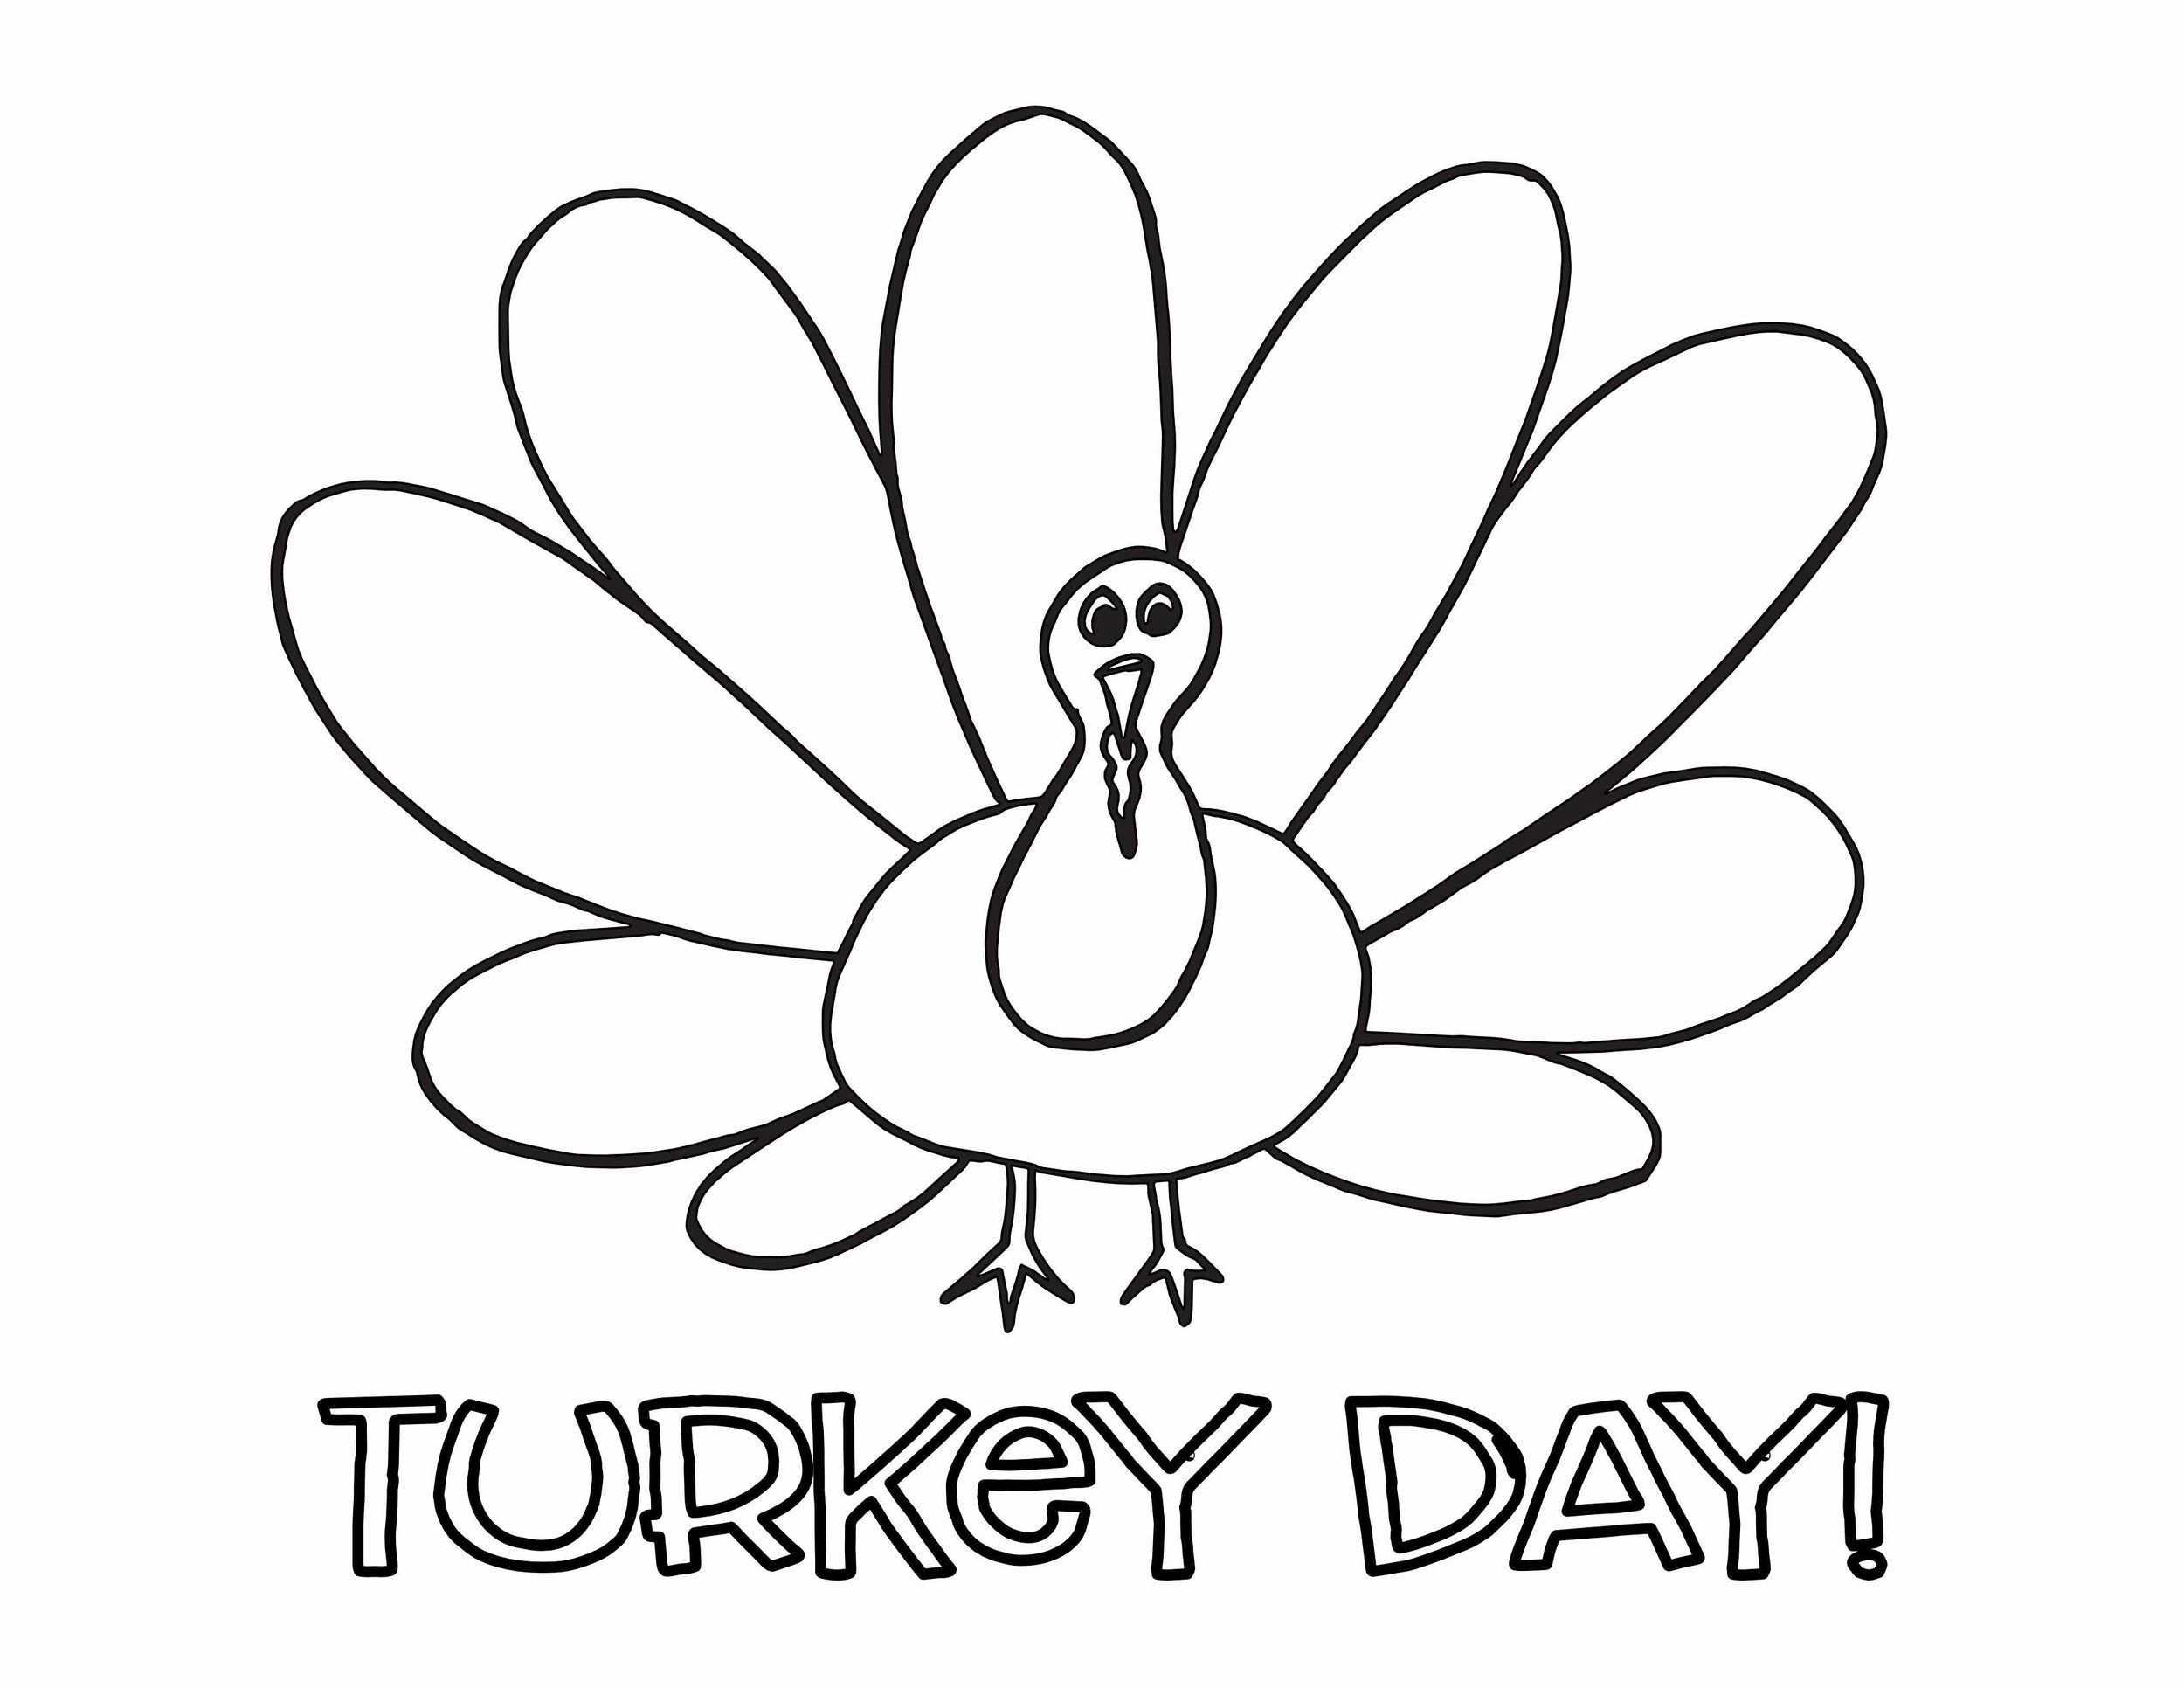 simple turkey drawing to color, colorable text "turkey day" underneath